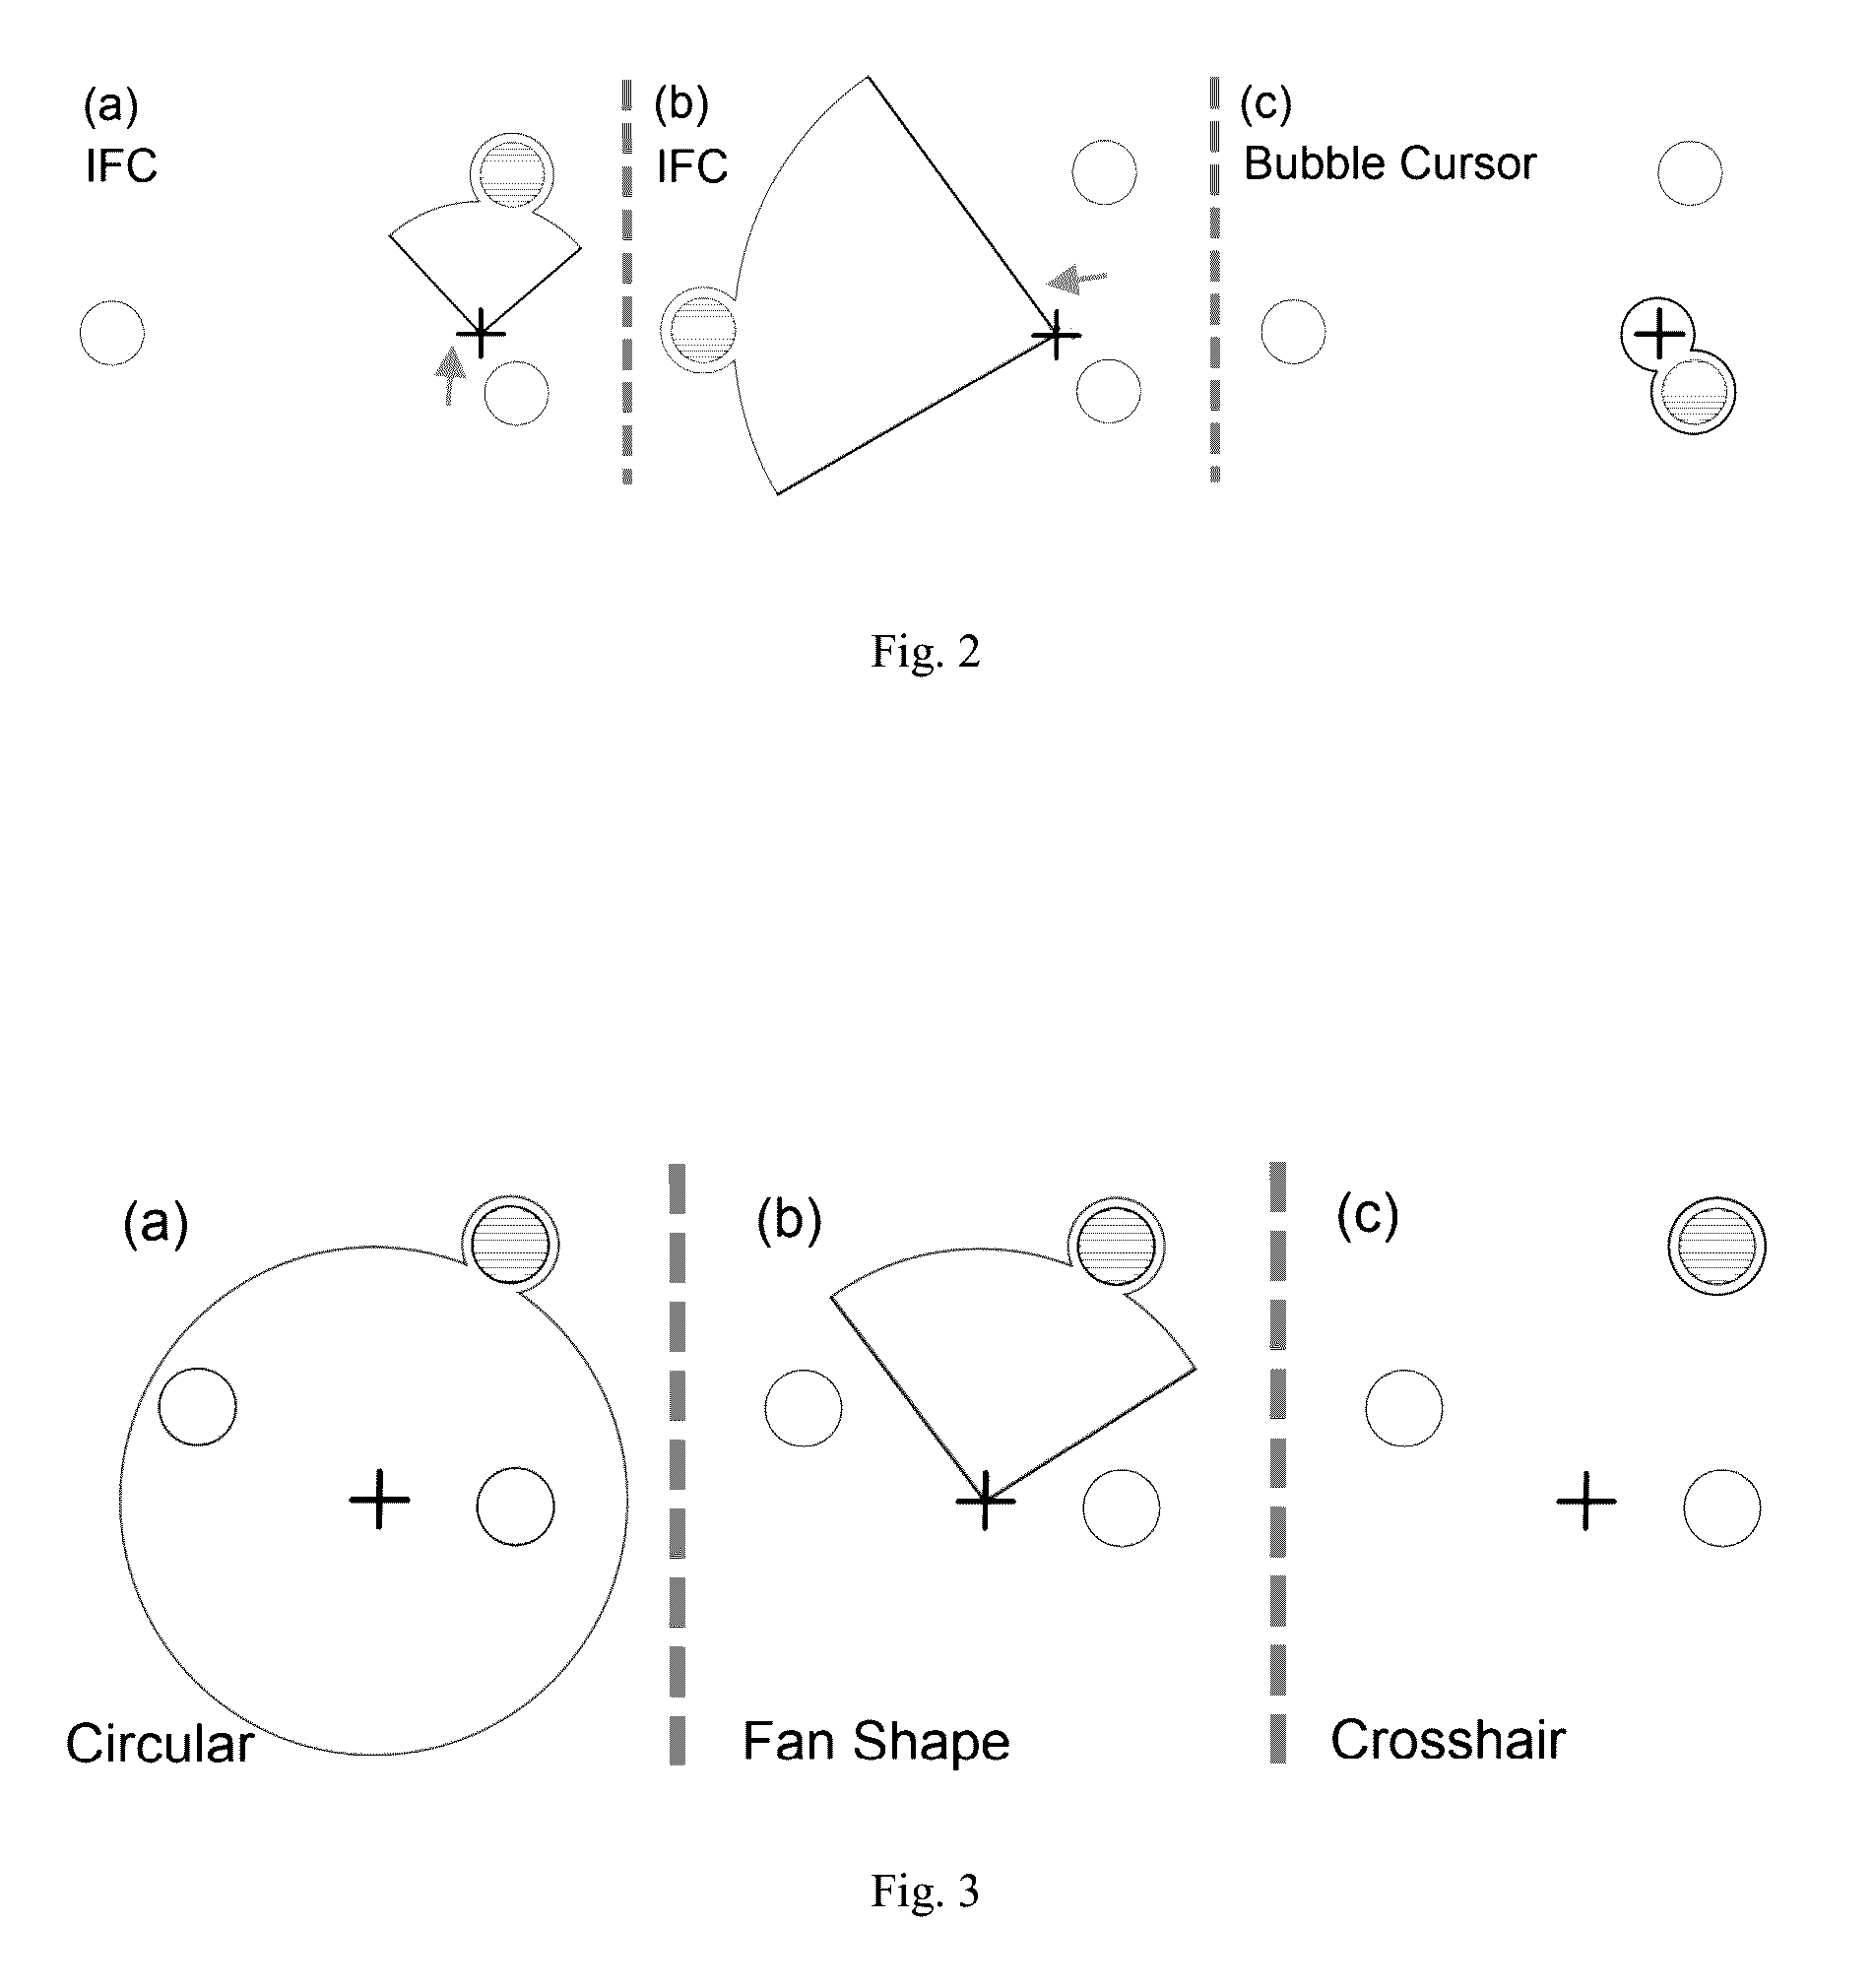 Target pointing system for use in graphical user interface